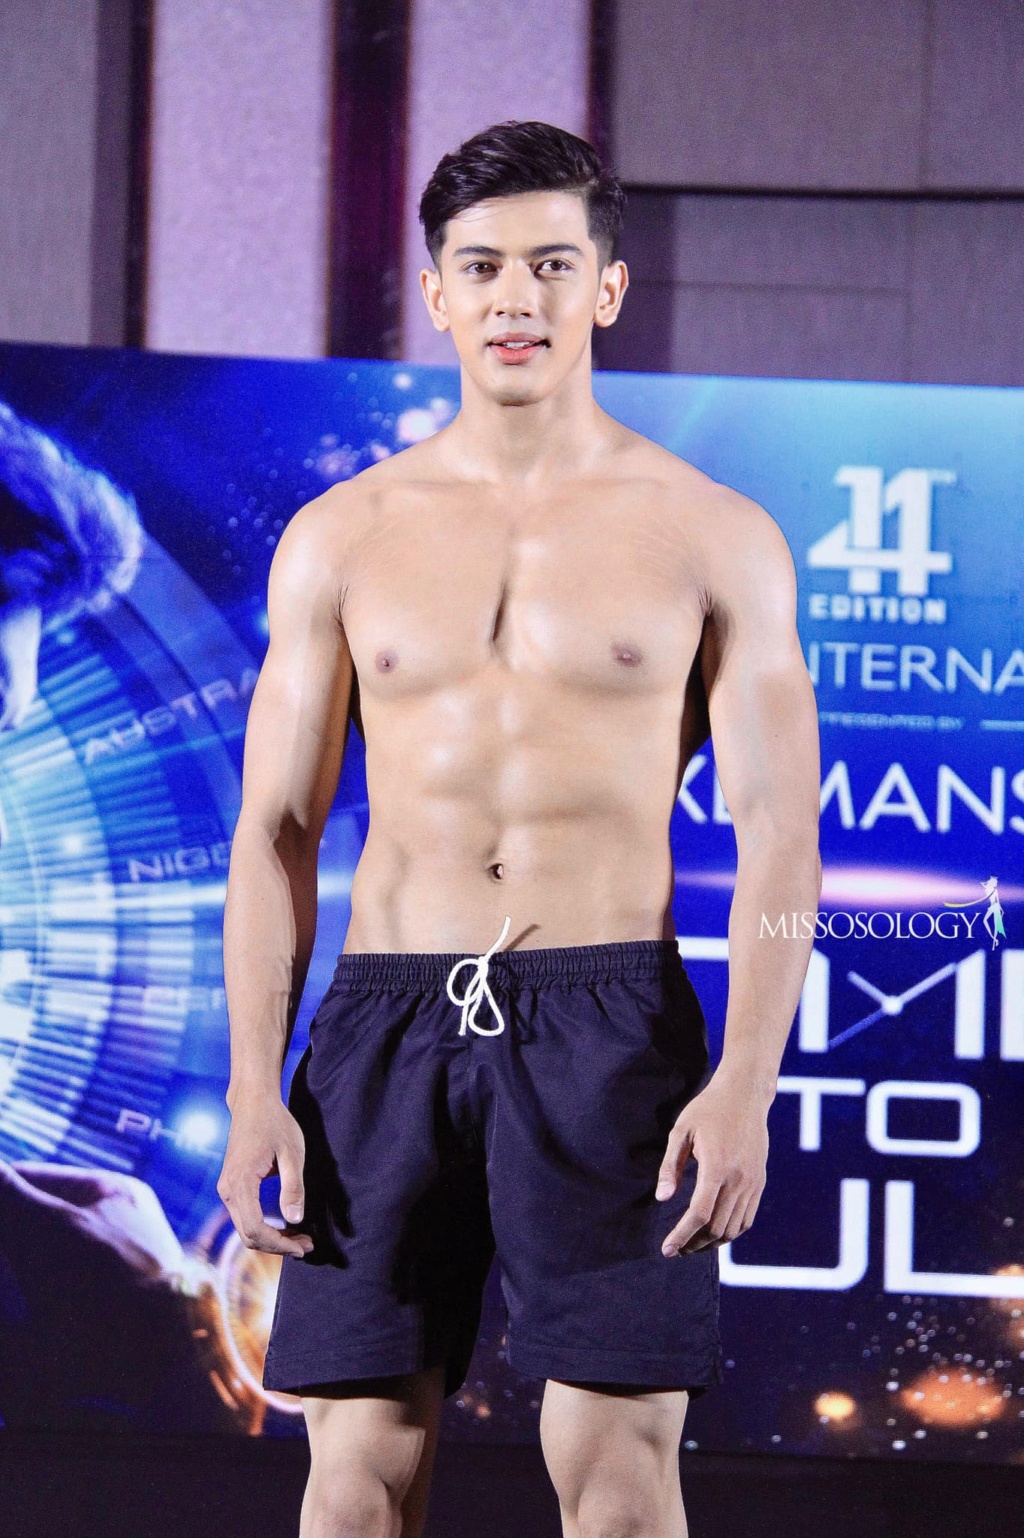 14th Mister International in Manila, Philippines - Oct 30th, 2022 - Winner is Dominican Republic 31246211